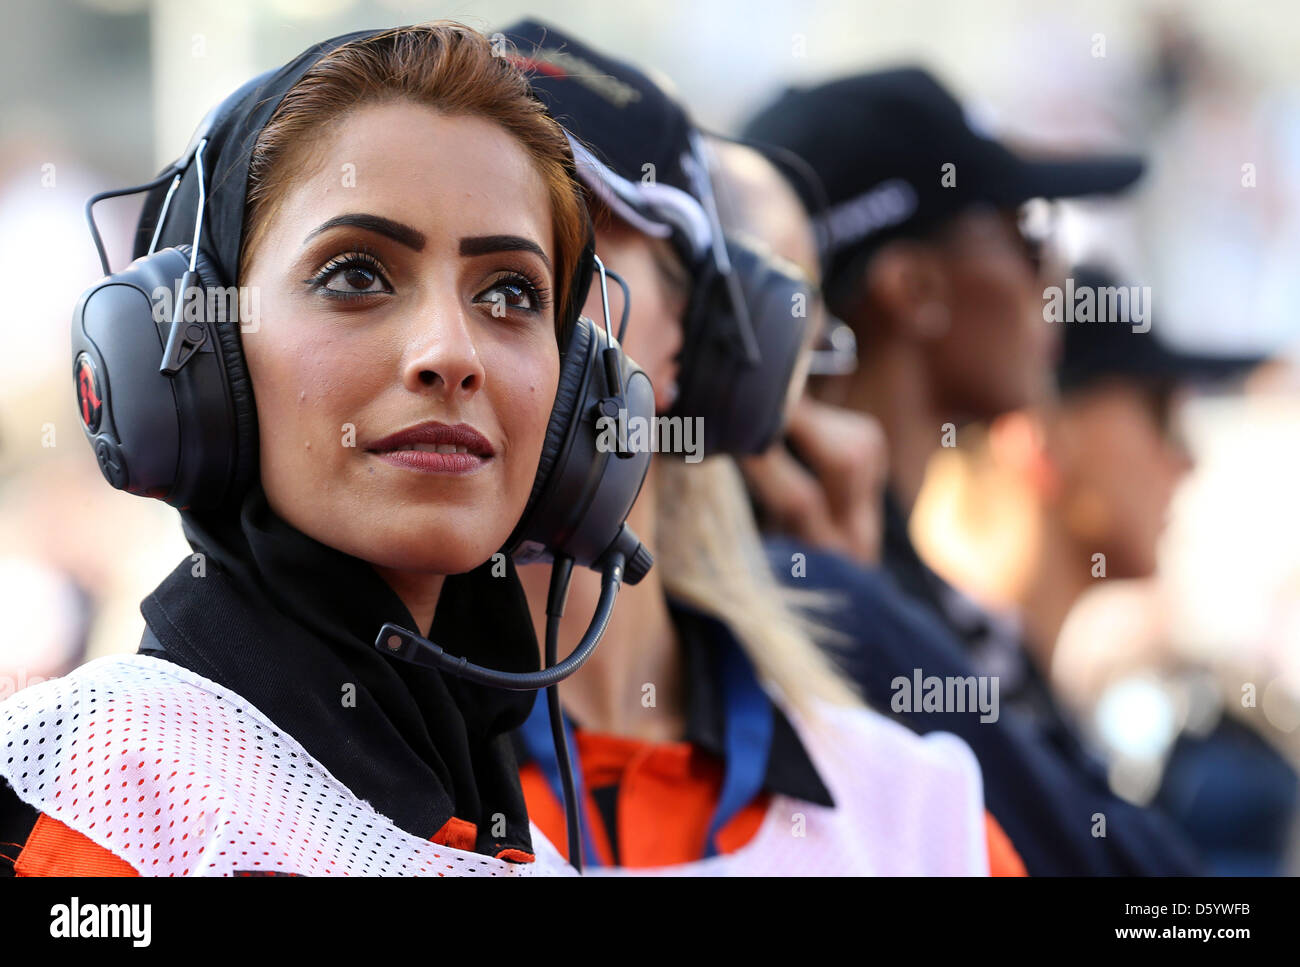 A marshal is seen during the driver's parade before the start of the Formula One Grand Prix of Abu Dhabi at the Yas Marina Circuit in Abu Dhabi, United Arab Emirates, 04 November 2012. Photo: Jens Buettner/dpa  +++(c) dpa - Bildfunk+++ Stock Photo